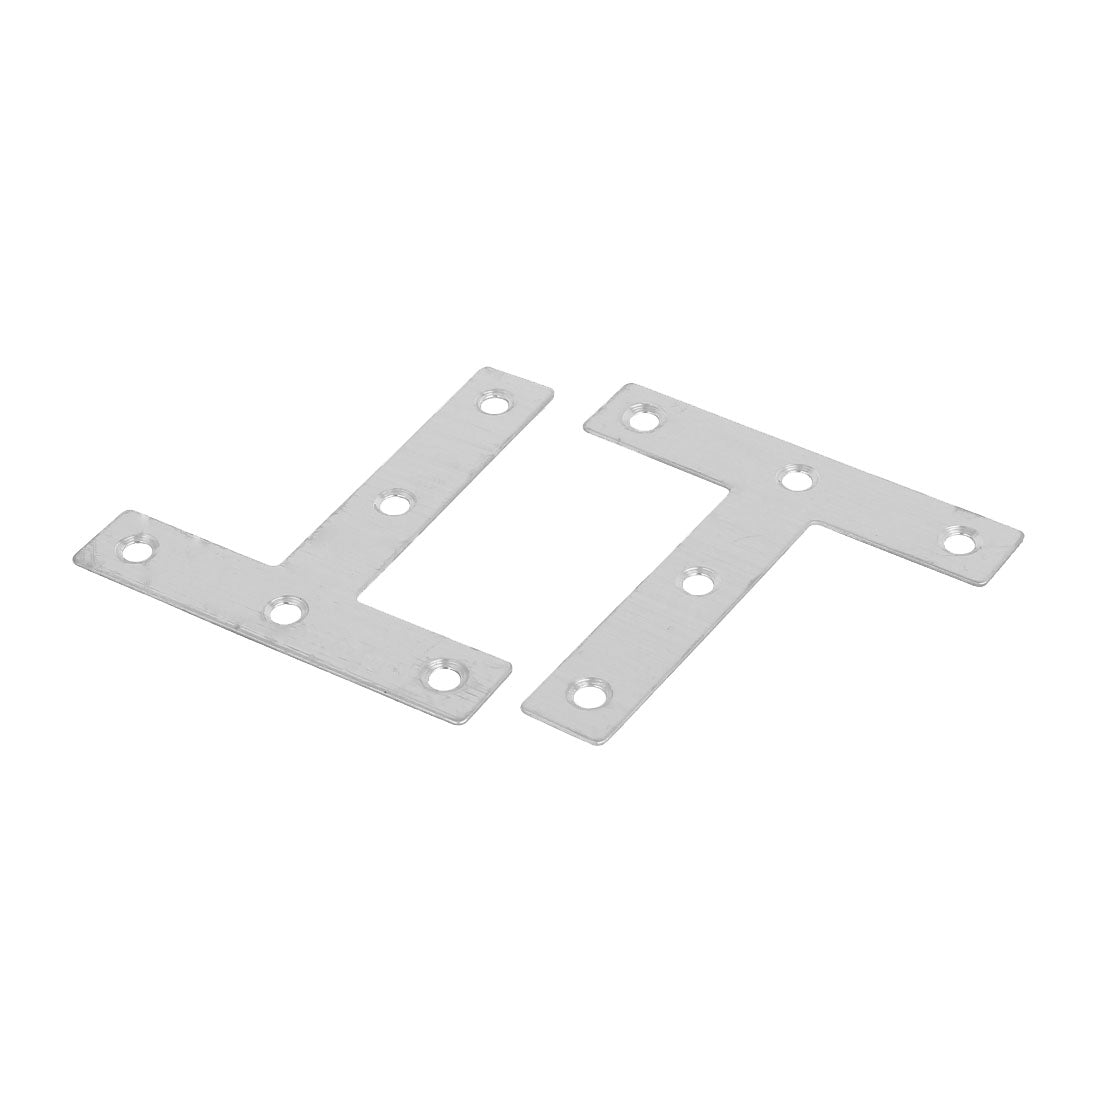 uxcell Uxcell 80mmx80mmx1mm Stainless Steel Flat T Shaped Corner Brace Repair Plates 4pcs